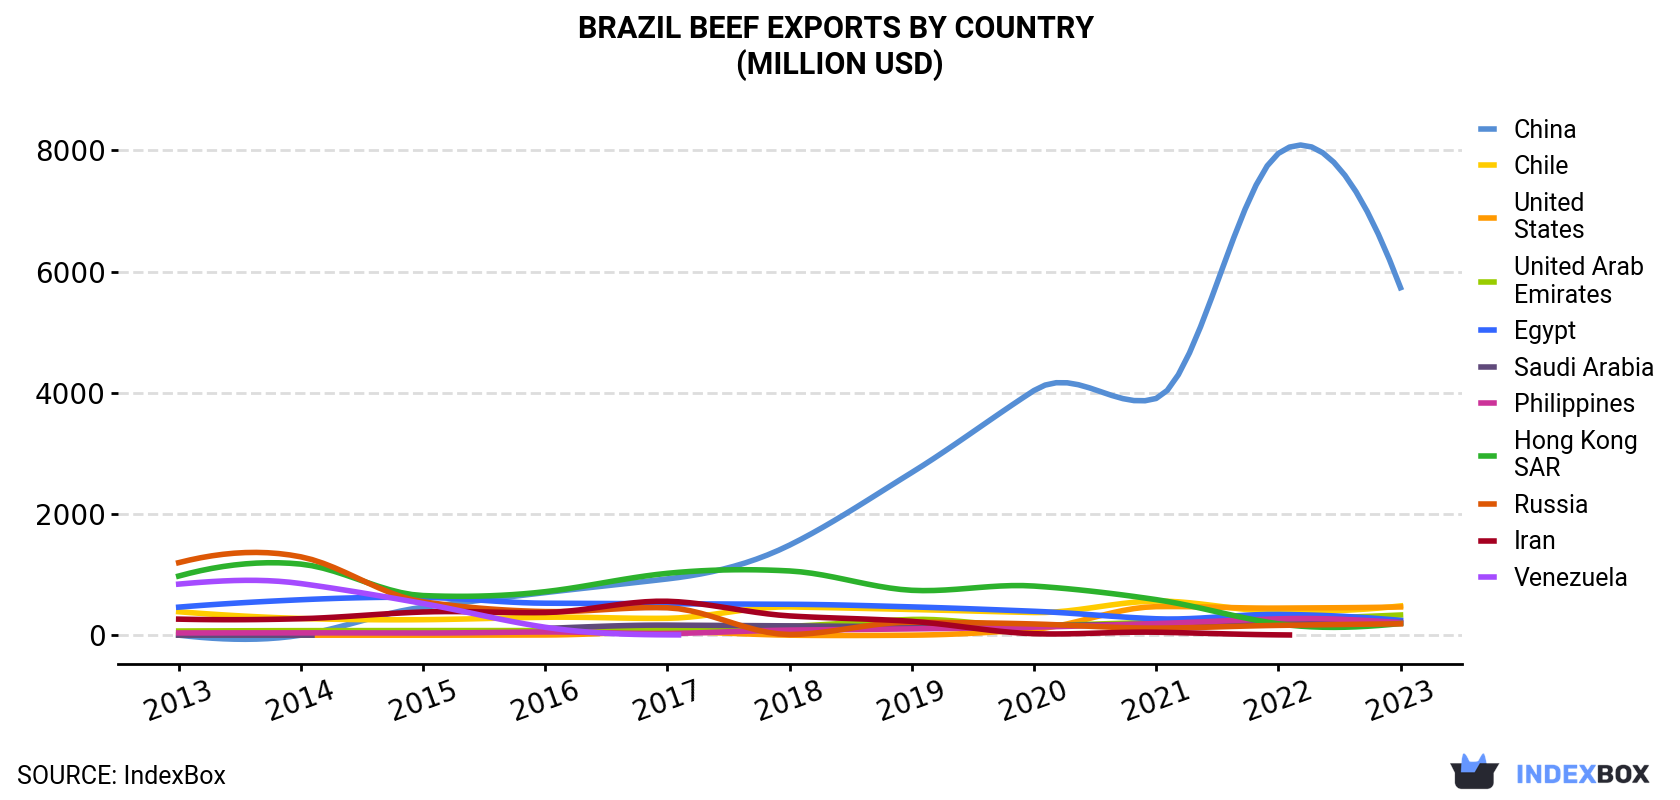 Brazil Beef Exports By Country (Million USD)